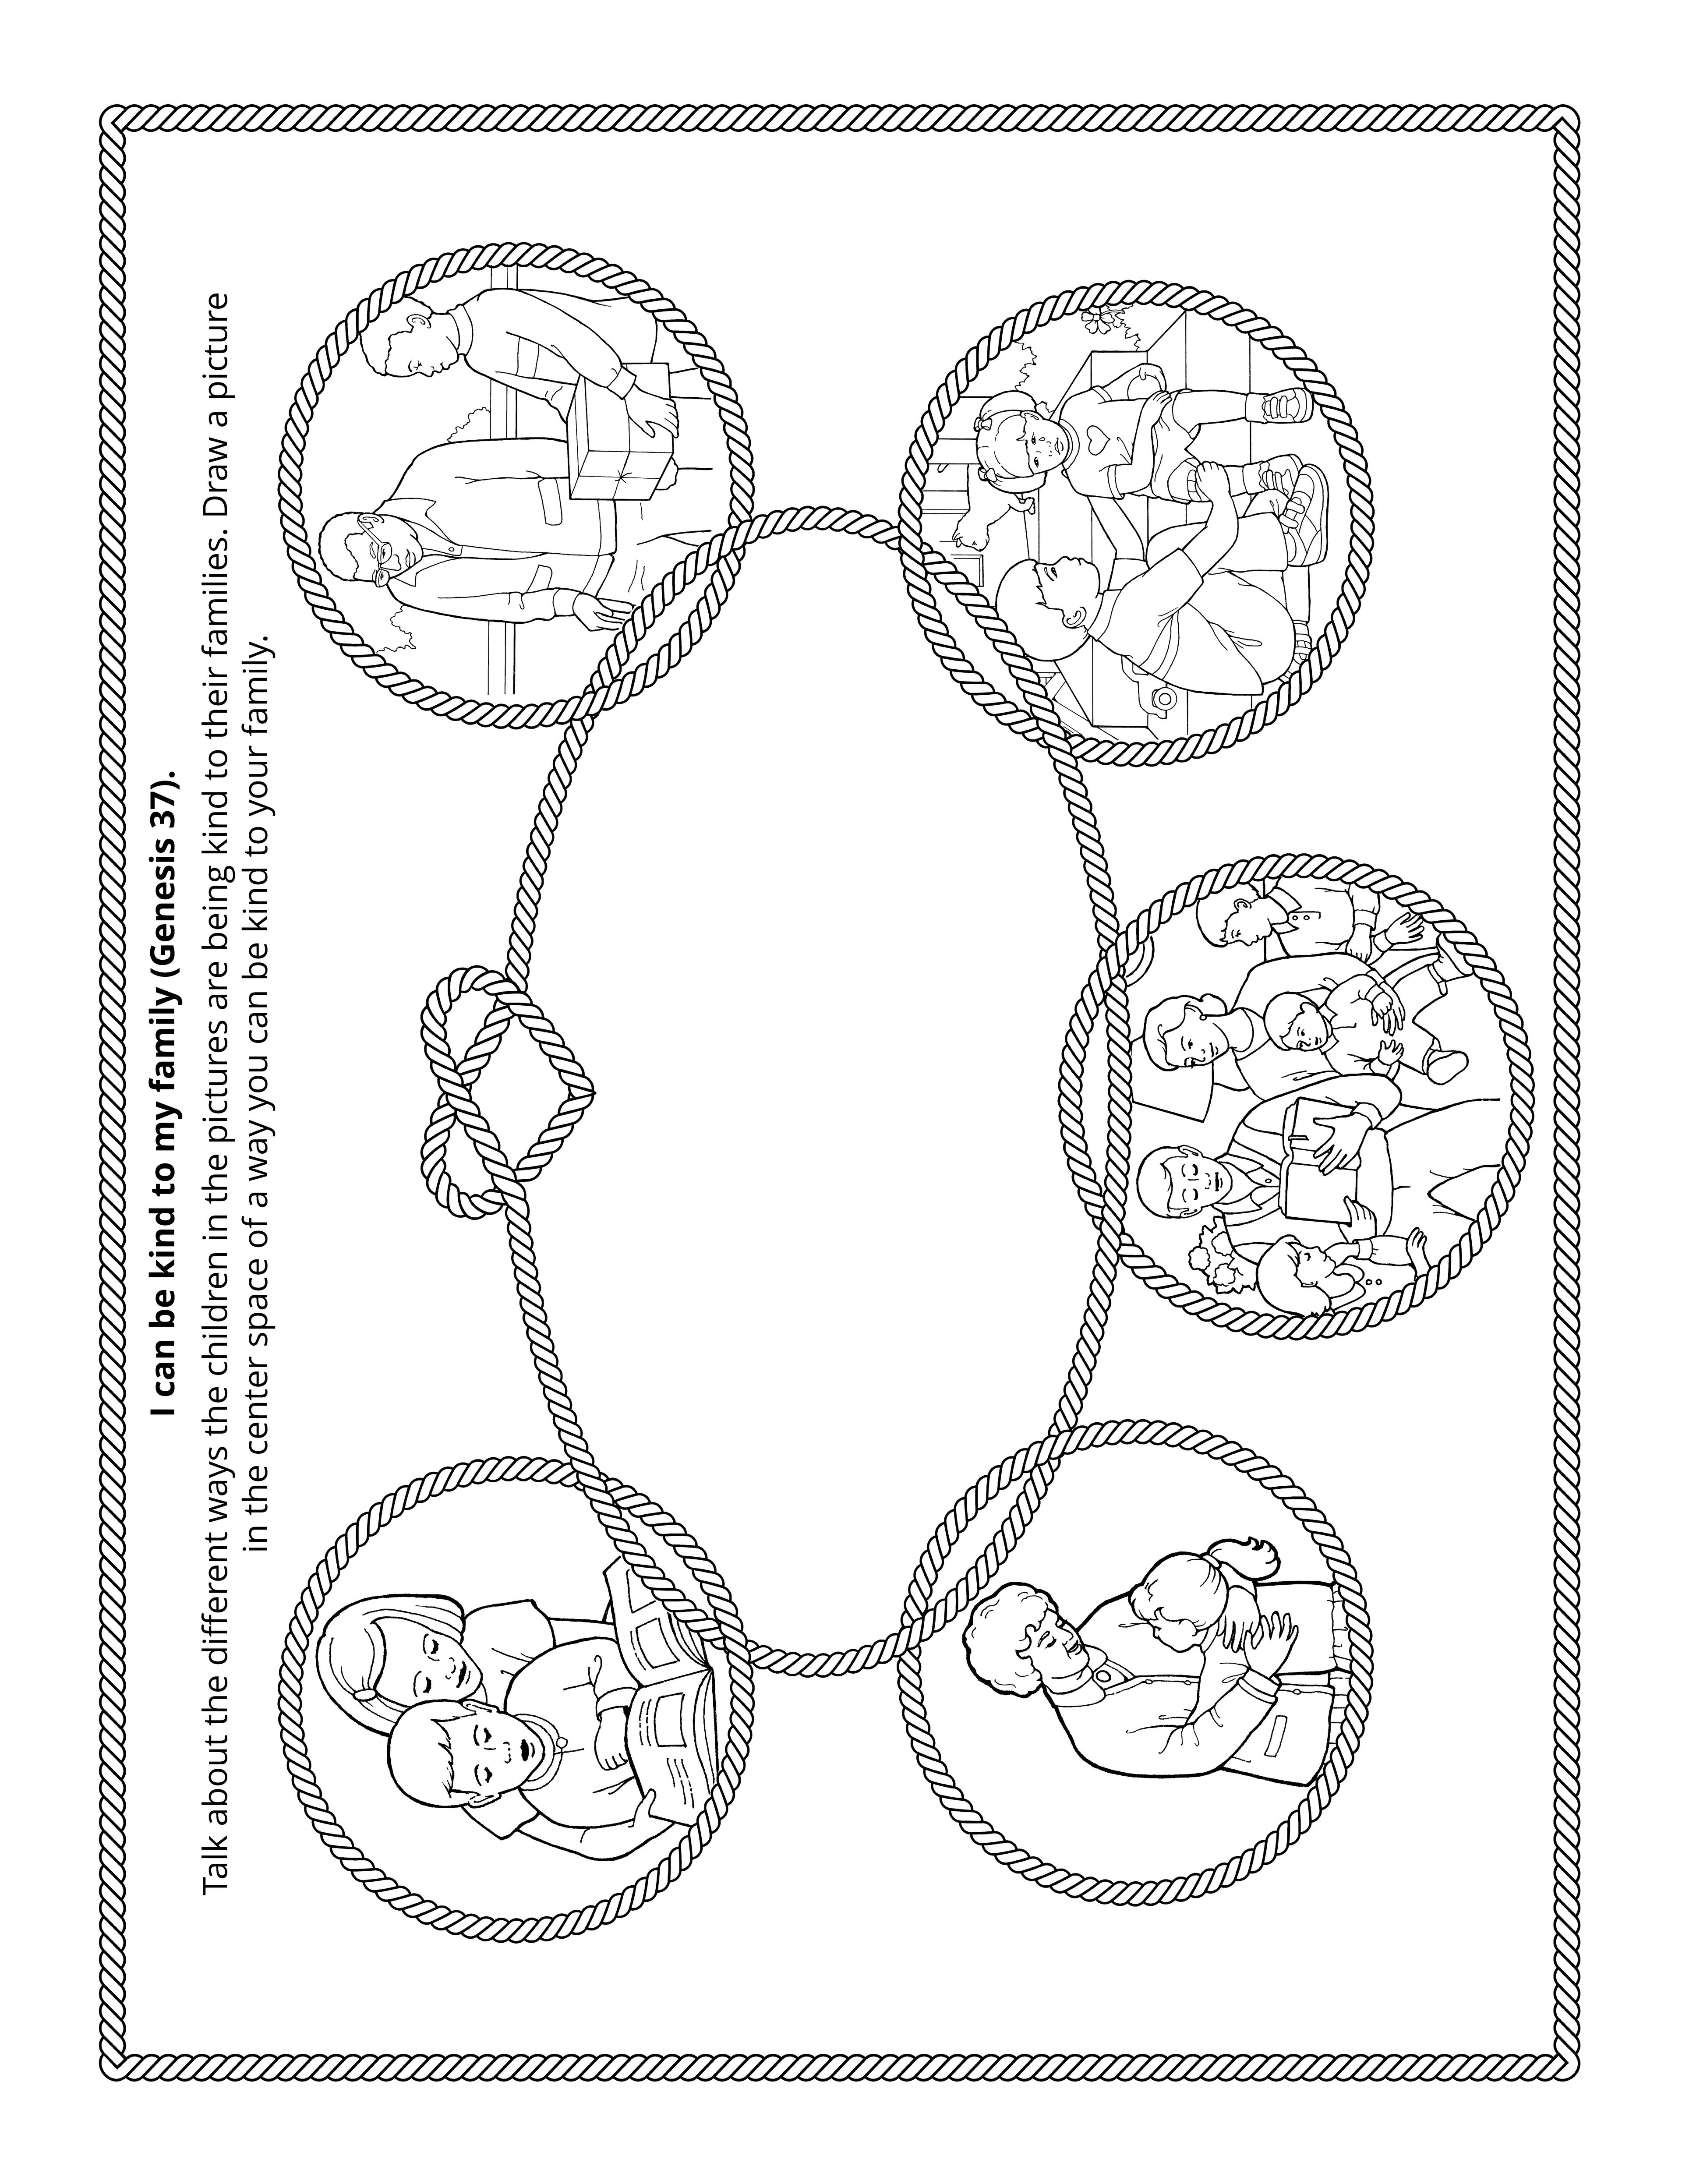 Primary coloring page.